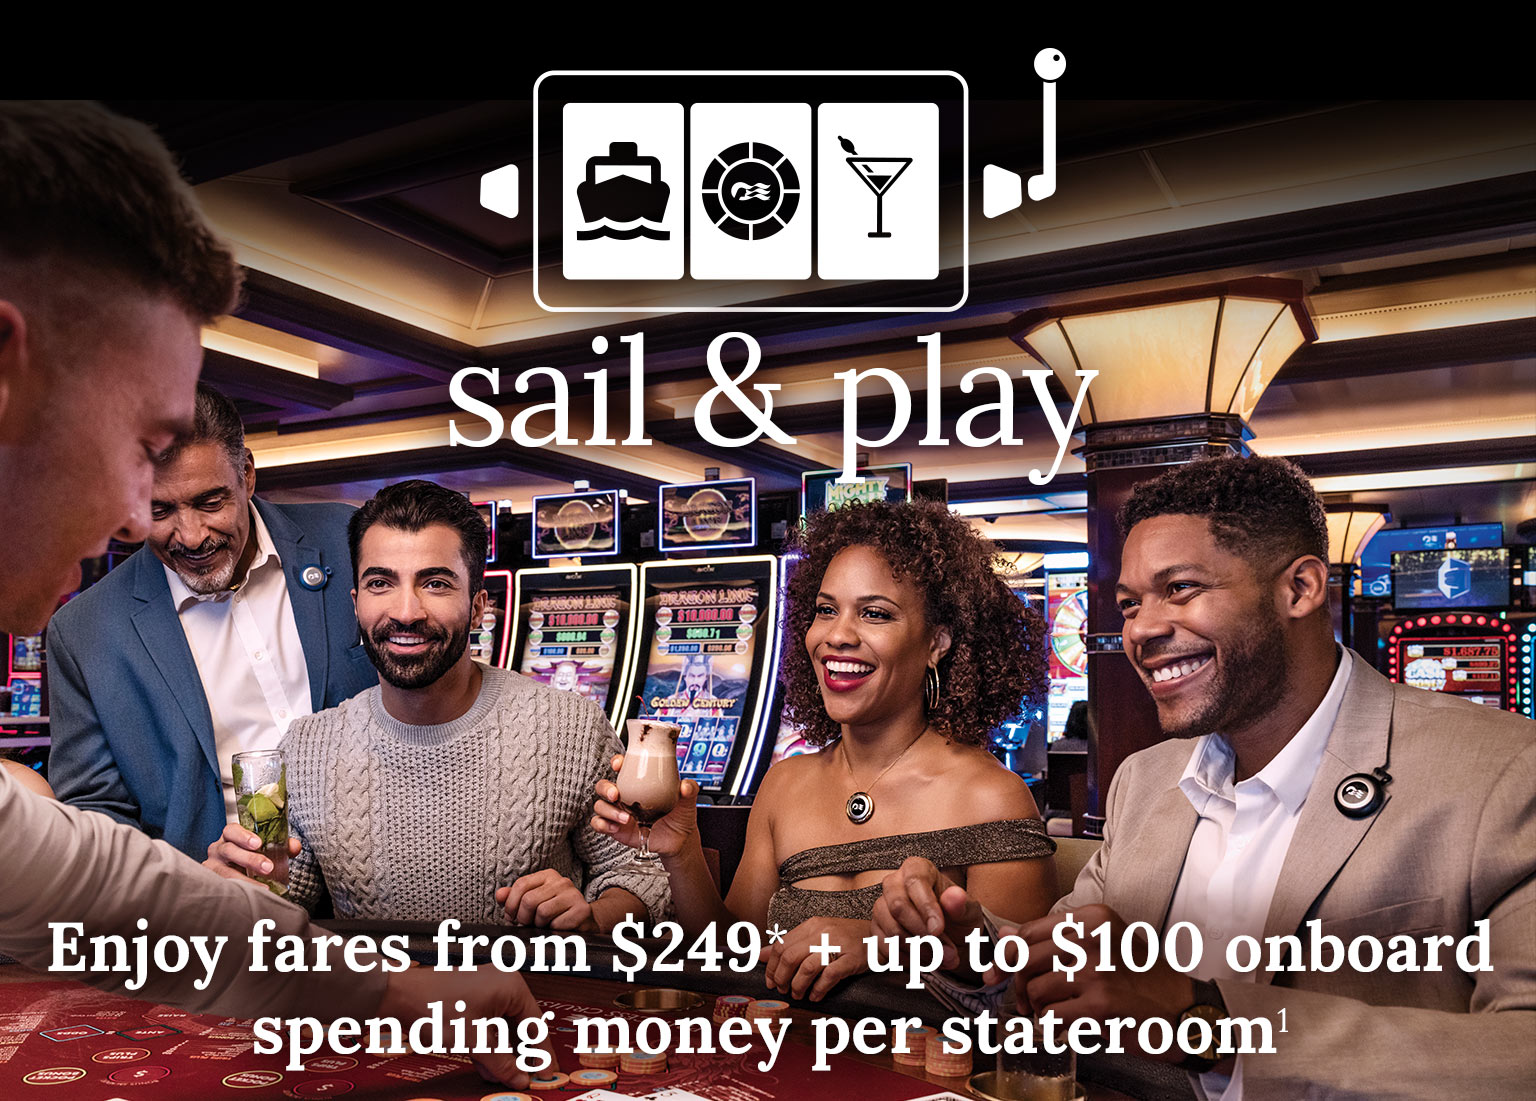 enjoy fares from $249 + up to $100 onboard spending money per stateroom. Click here to book. 